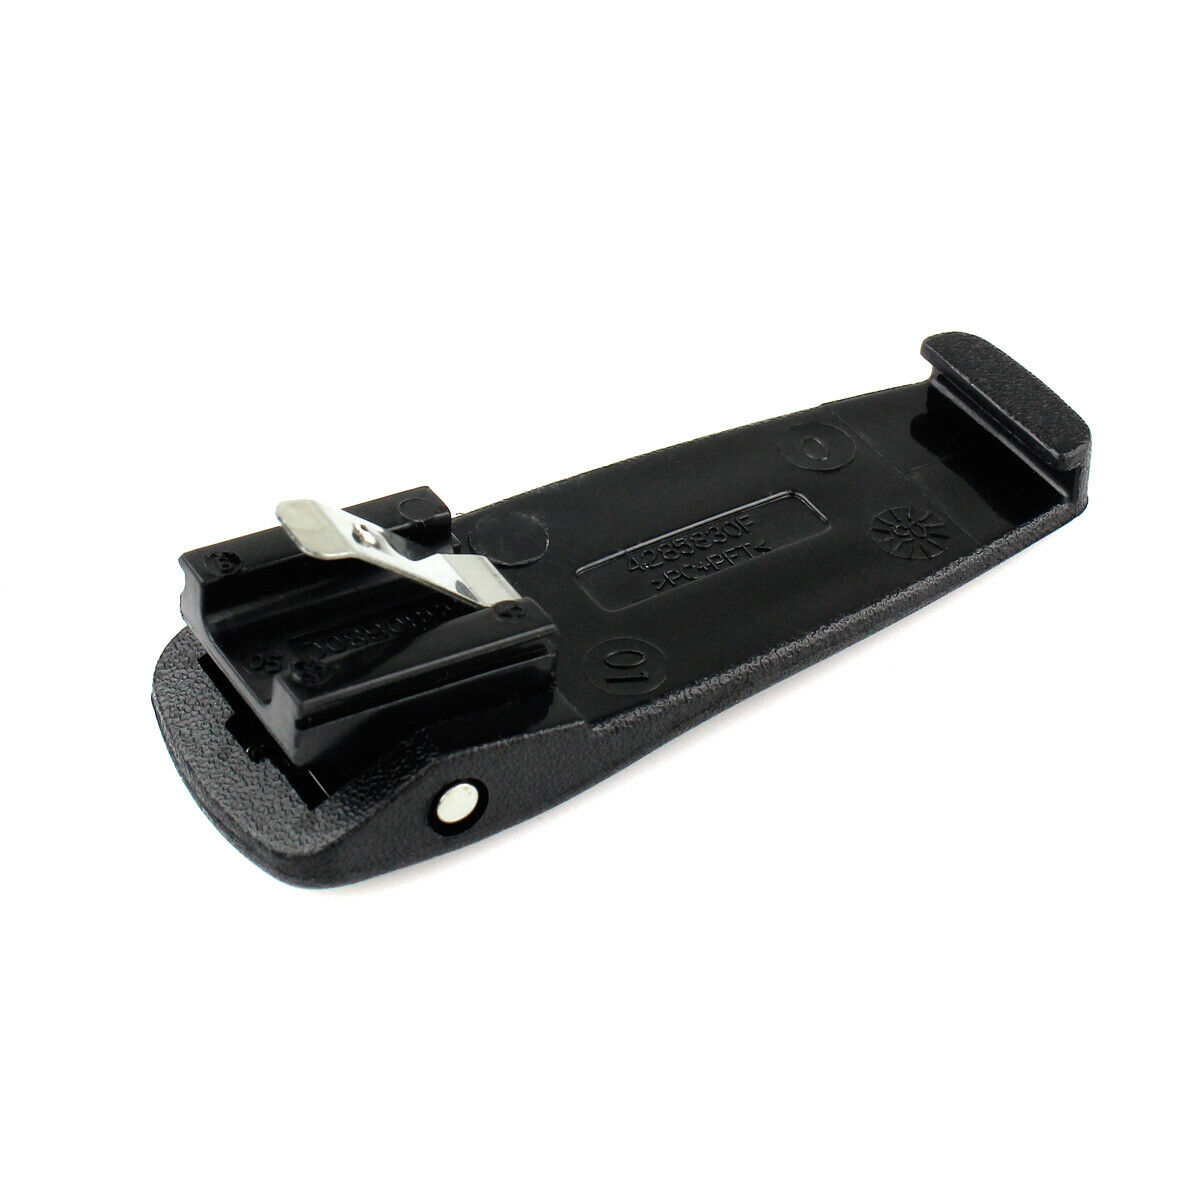 Rechargeable Ni-MH Battery 1500mAh with Belt Clip for Motorola Mag One BPR40 A8 Radio